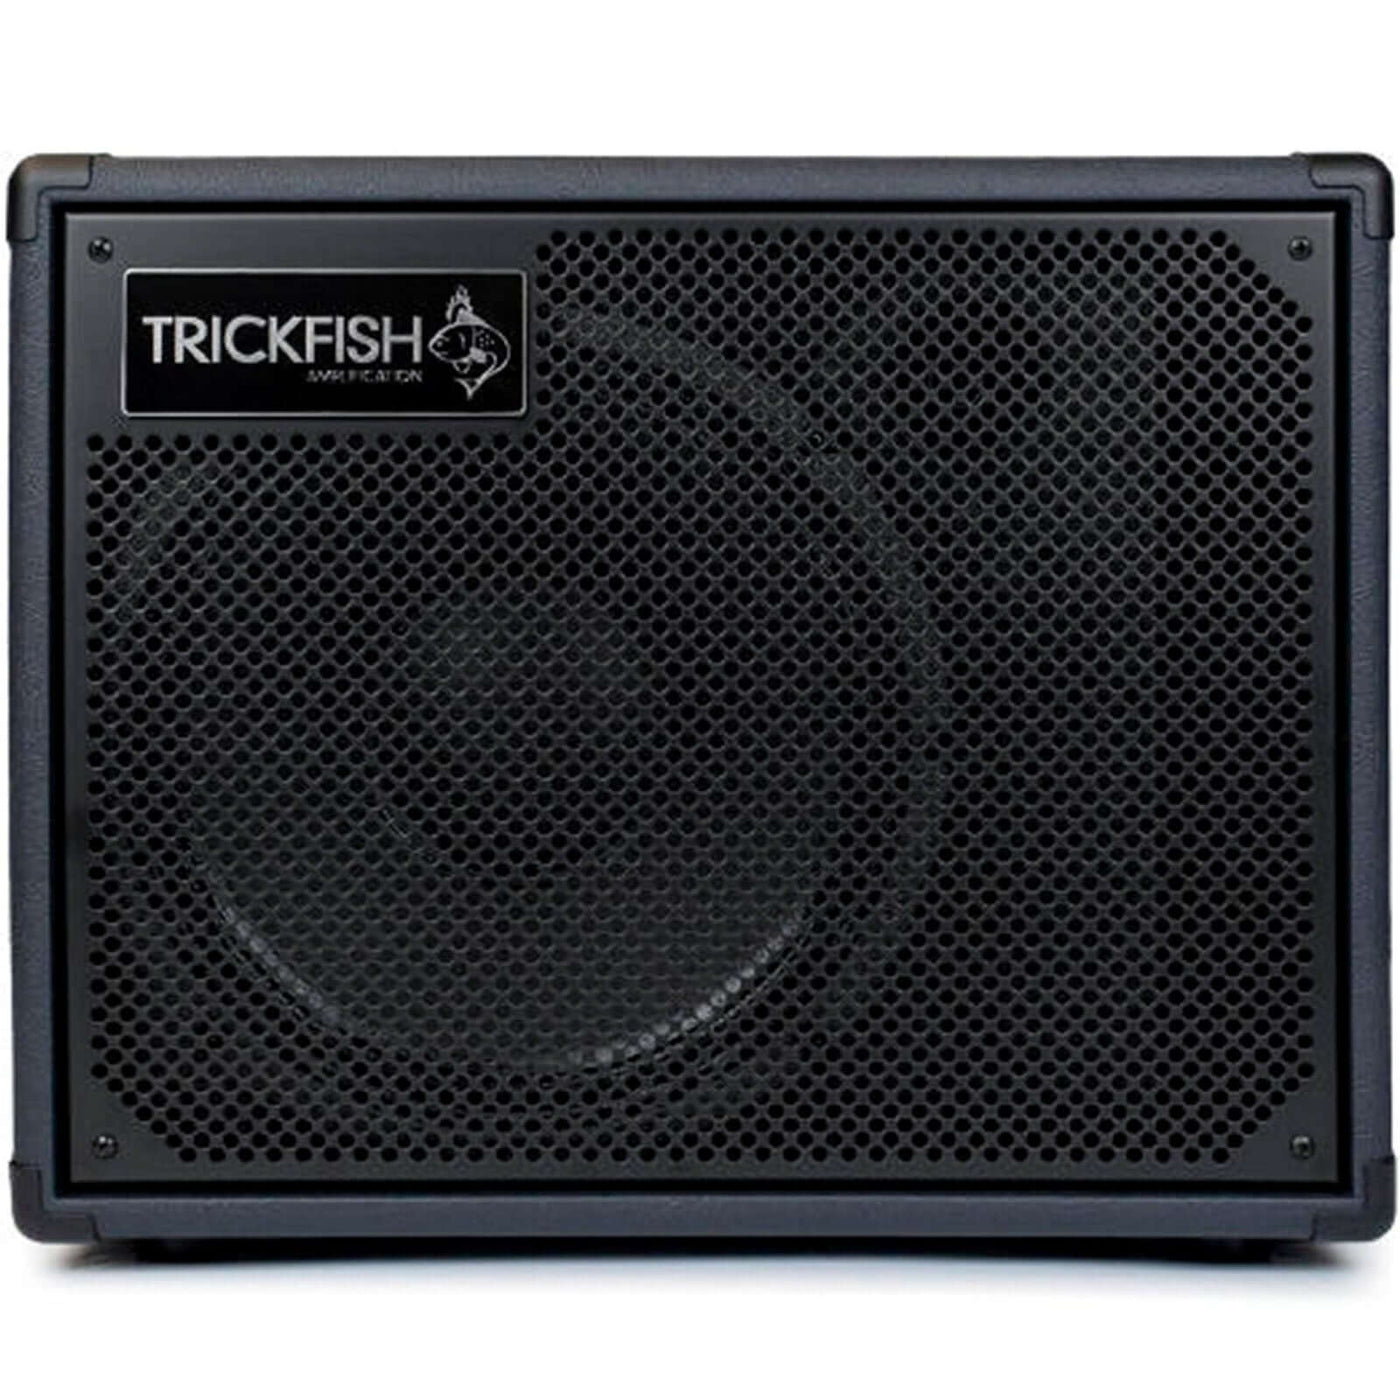 Trickfish TF112 - A favorite among bassists looking for portability and even frequency response in a low to mid volume application, the TF112 is precise, punchy and tuned for an even response. While the cabinet can be EQ’d to sound believable in any genre